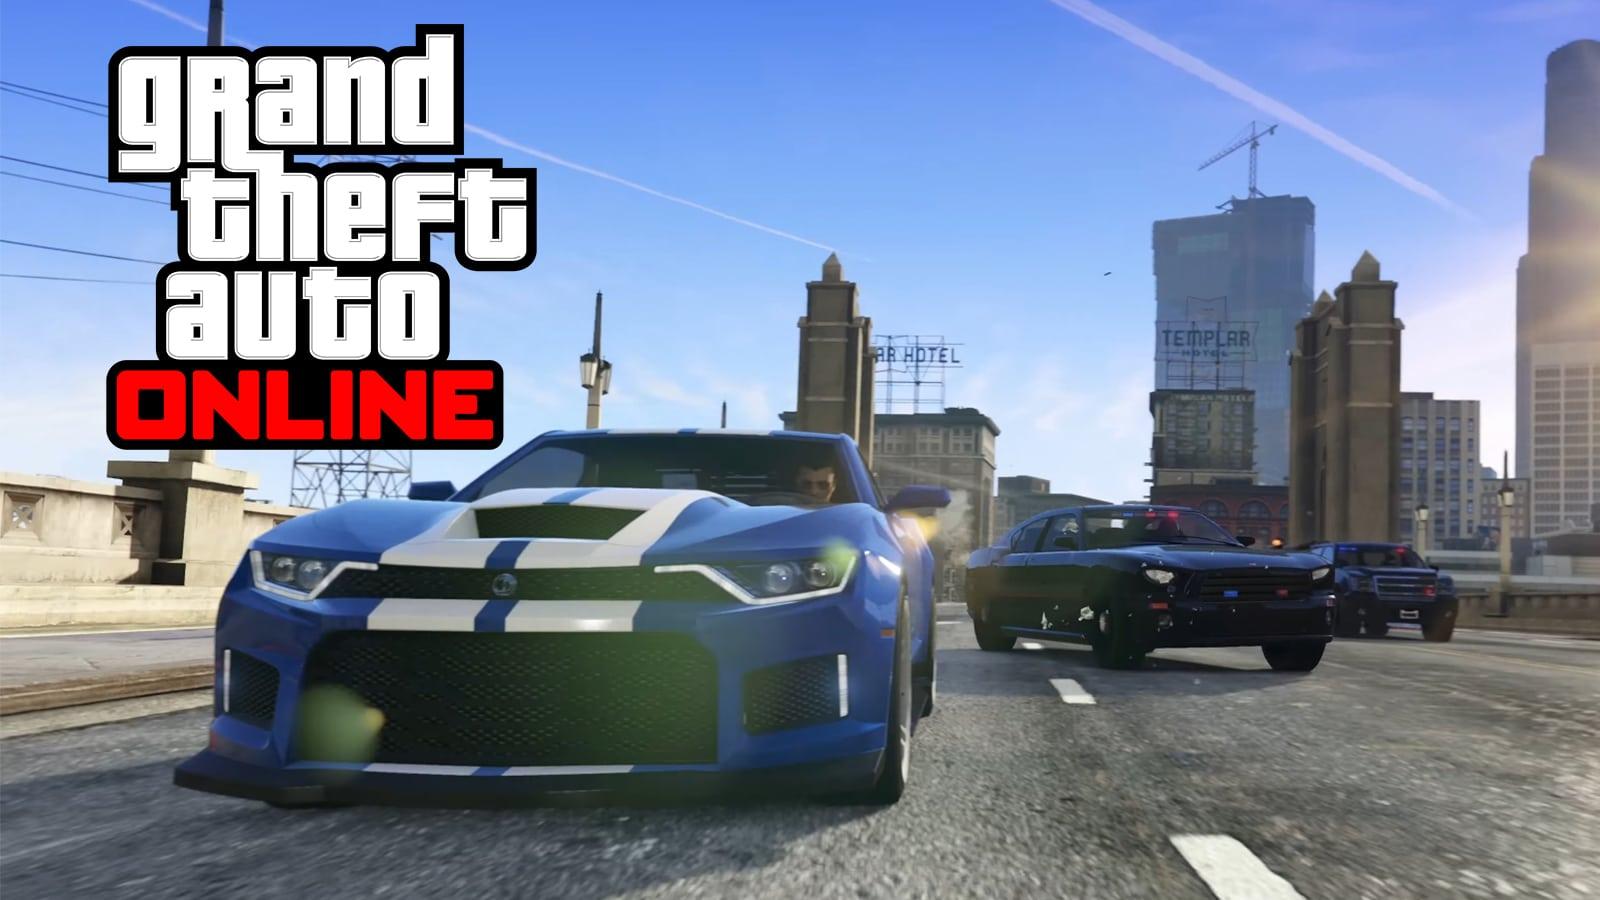 Rockstar gives GTA Online players loads of free vehicles in new update -  Dexerto